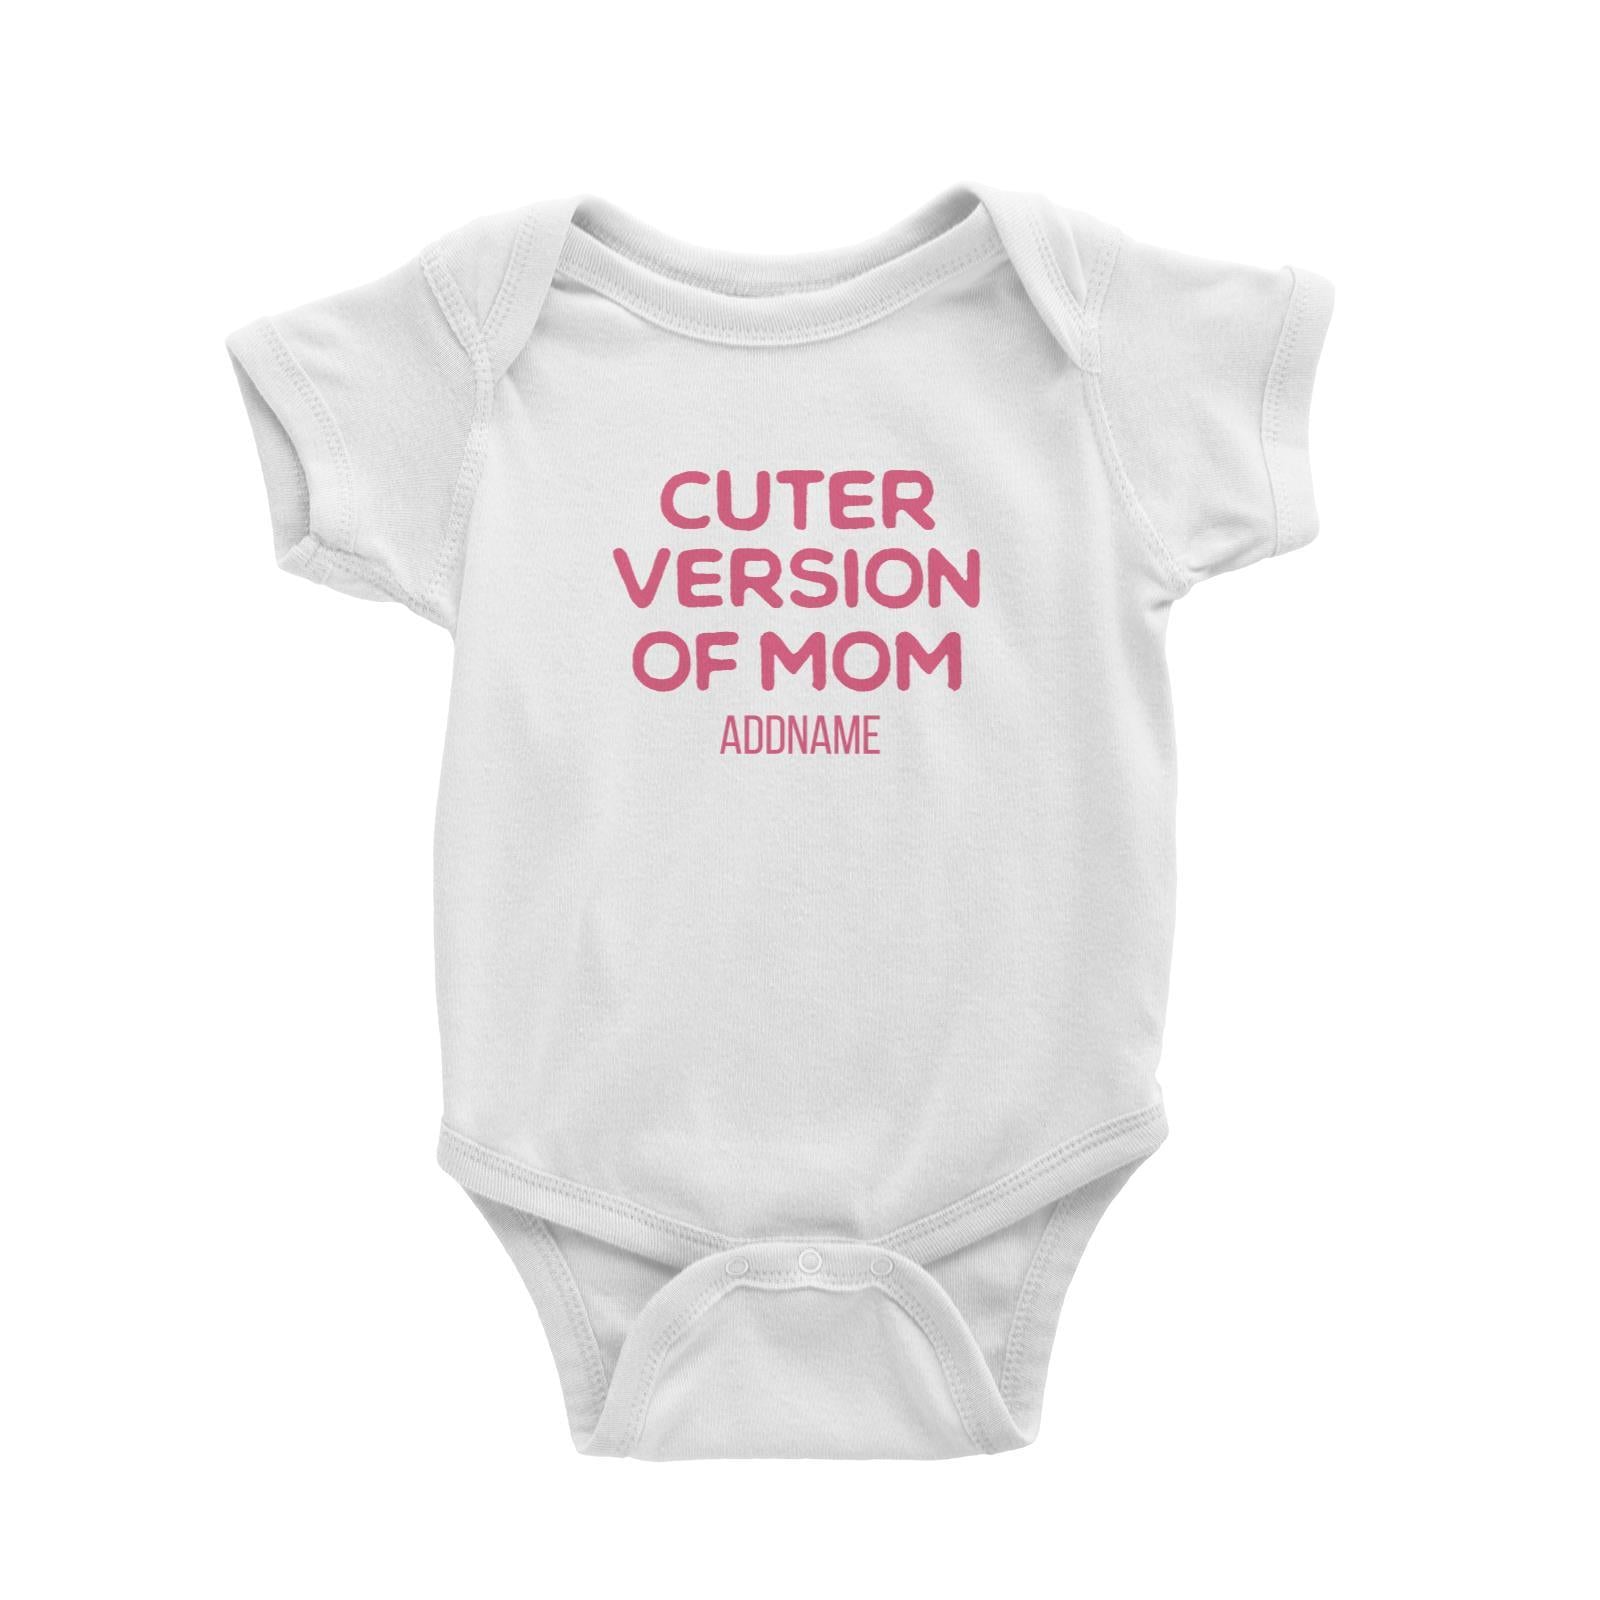 Cuter Version of Mom Addname Baby Romper